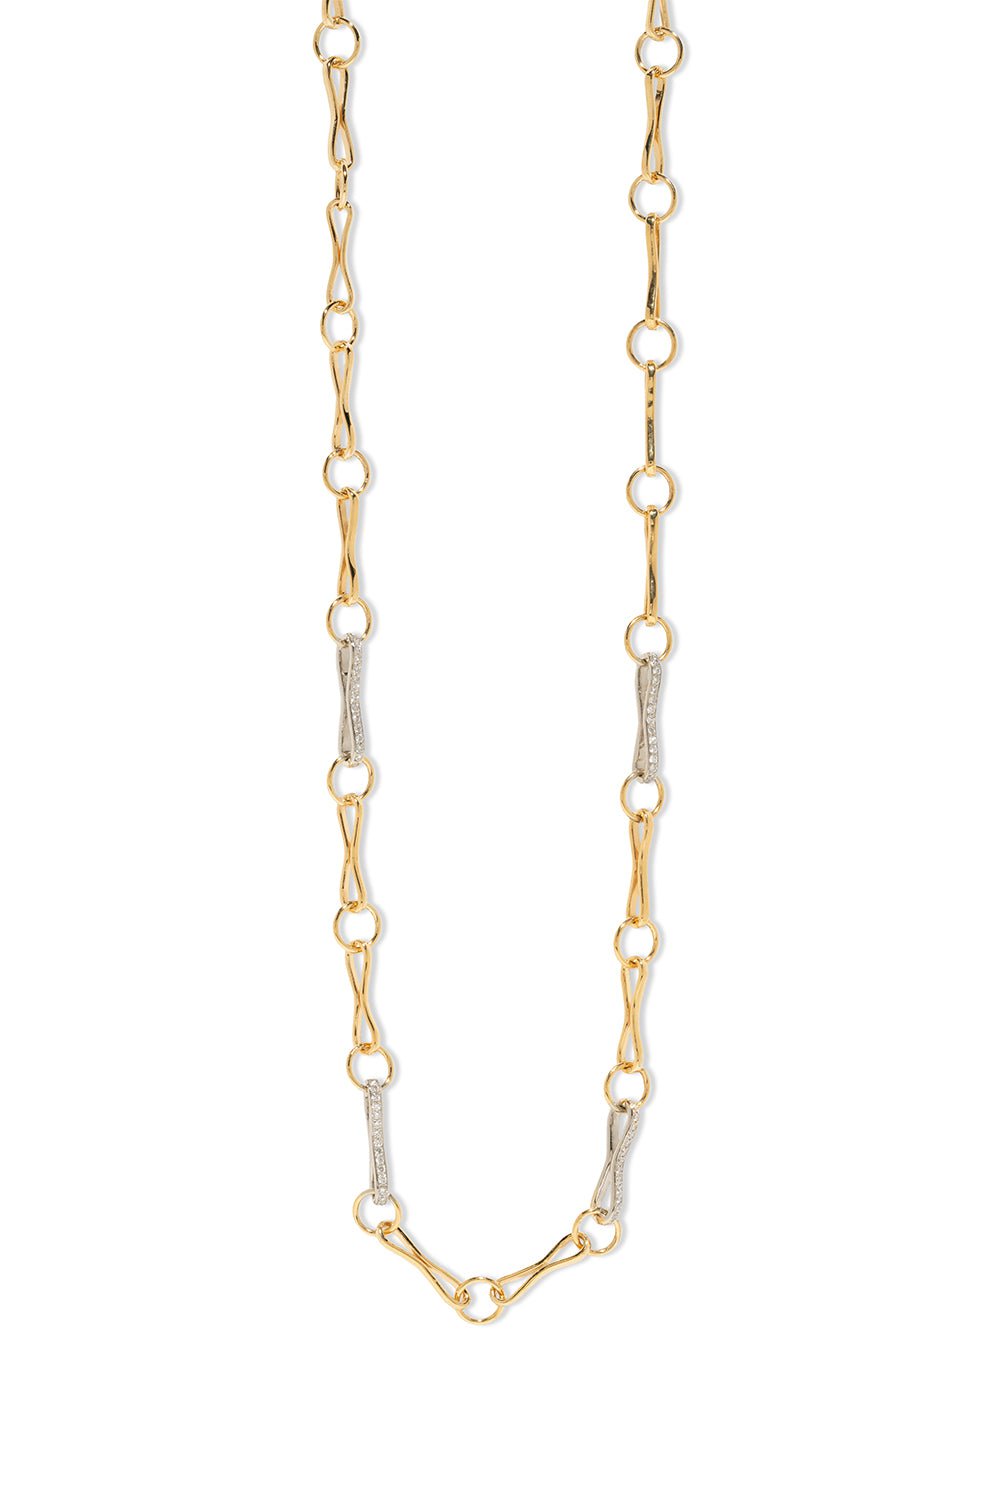 AZLEE-Large Pave Circle Link Chain 20"-YELLOW GOLD